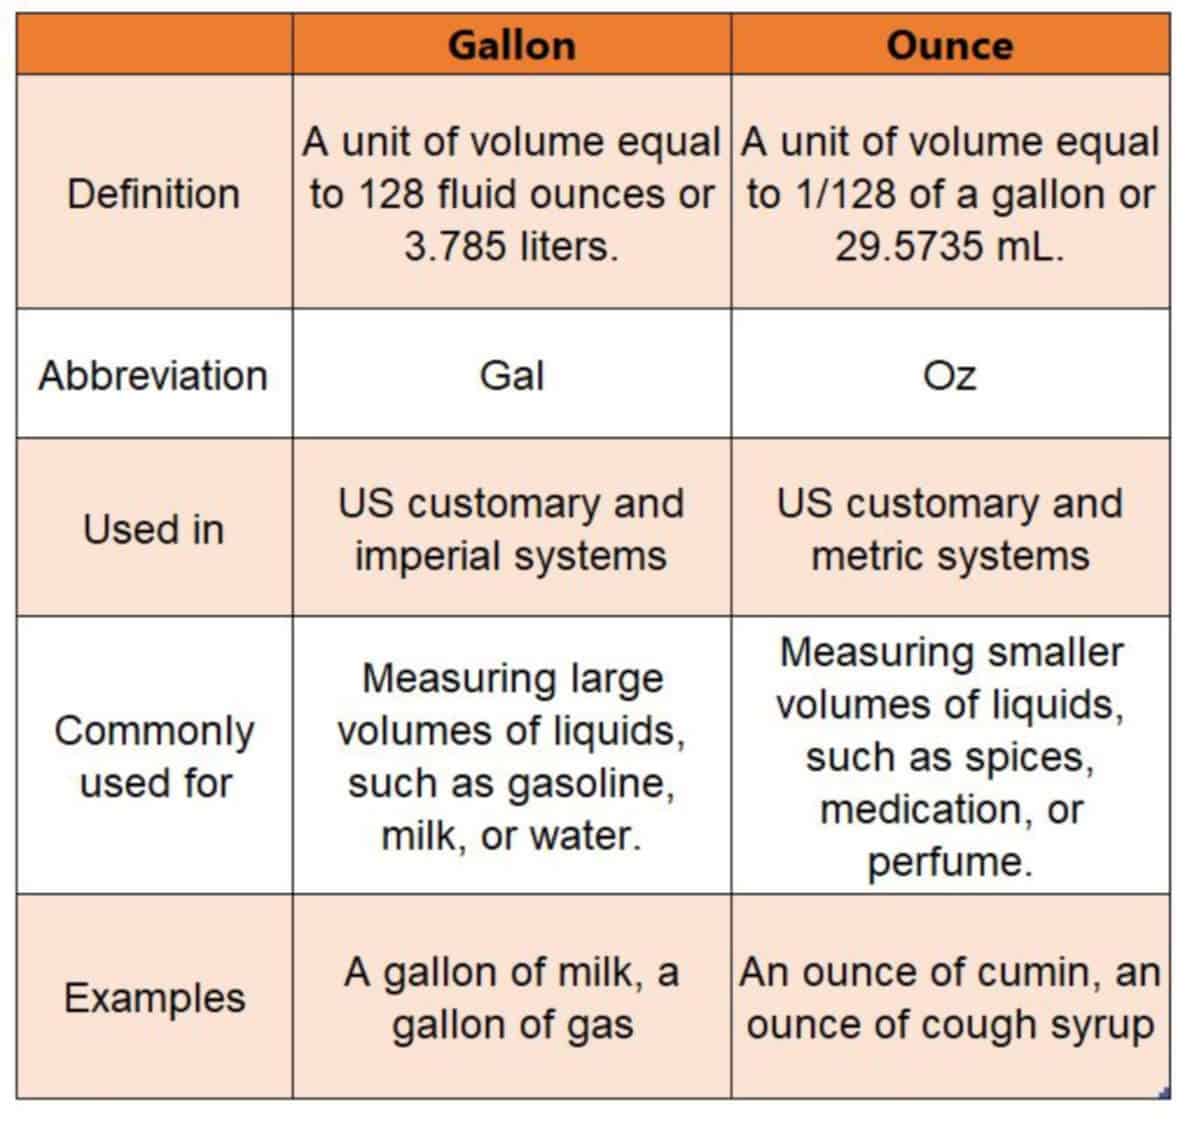 Difference between gallon and ounce.